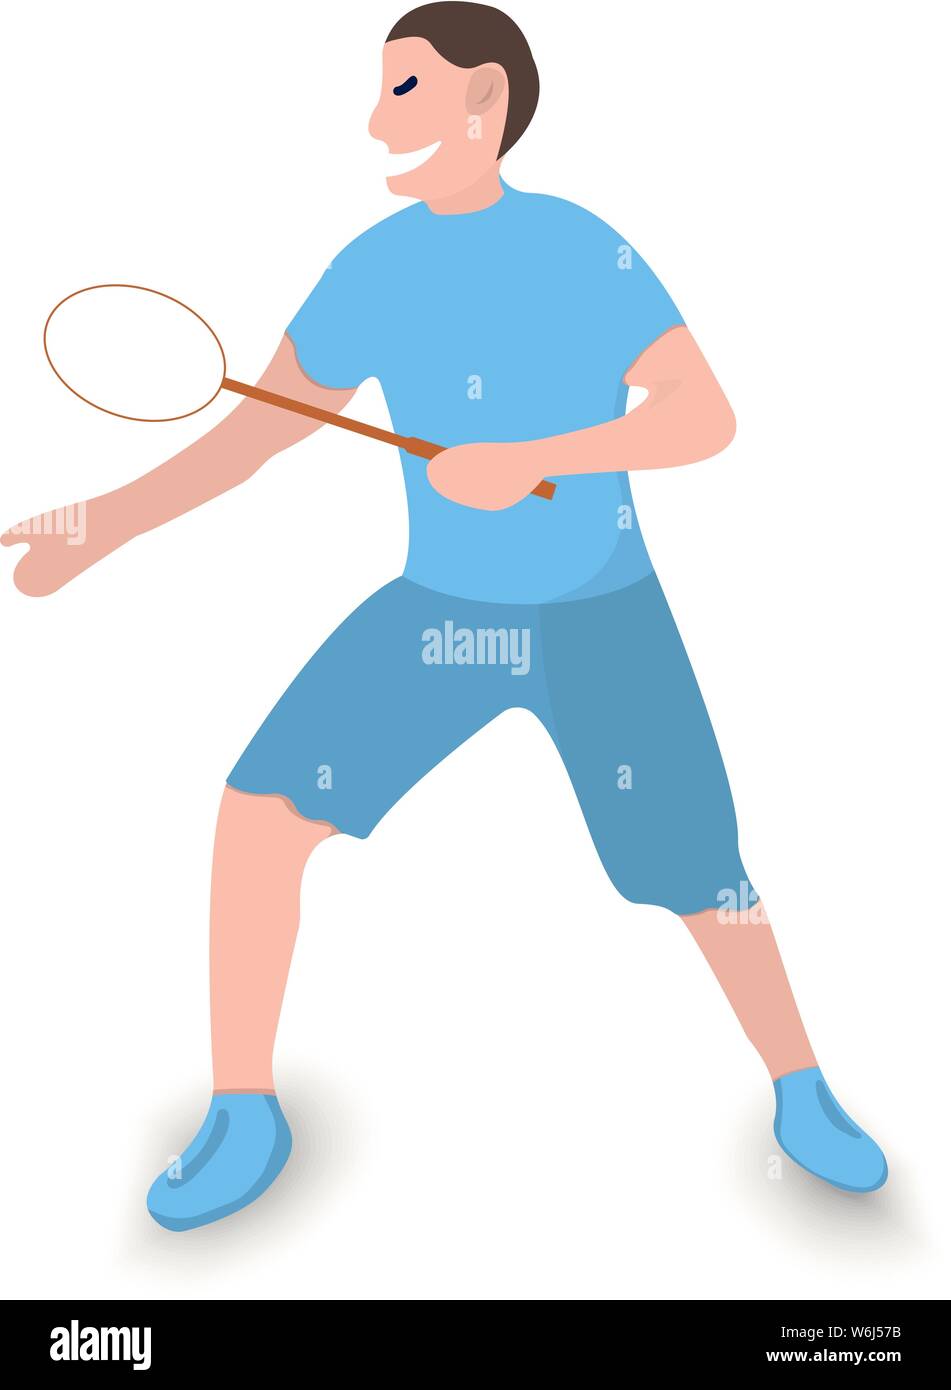 Tennis player icon. Sport label on white Background. Character Cartoon style. Vector Illustration. Stock Vector